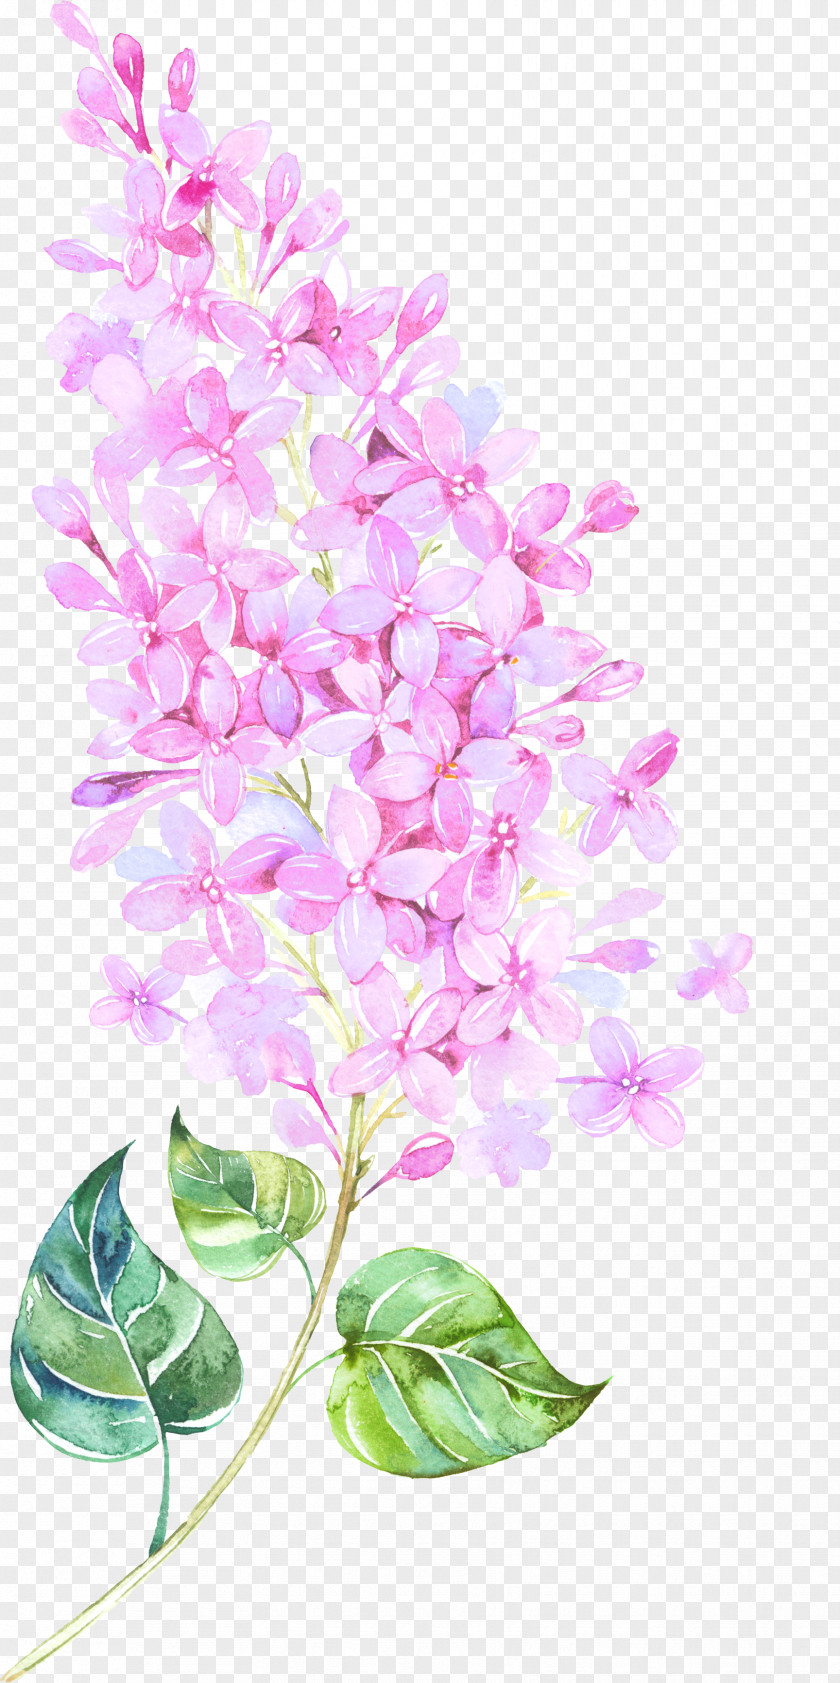 Floating Flower Watercolor Painting Floral Design PNG